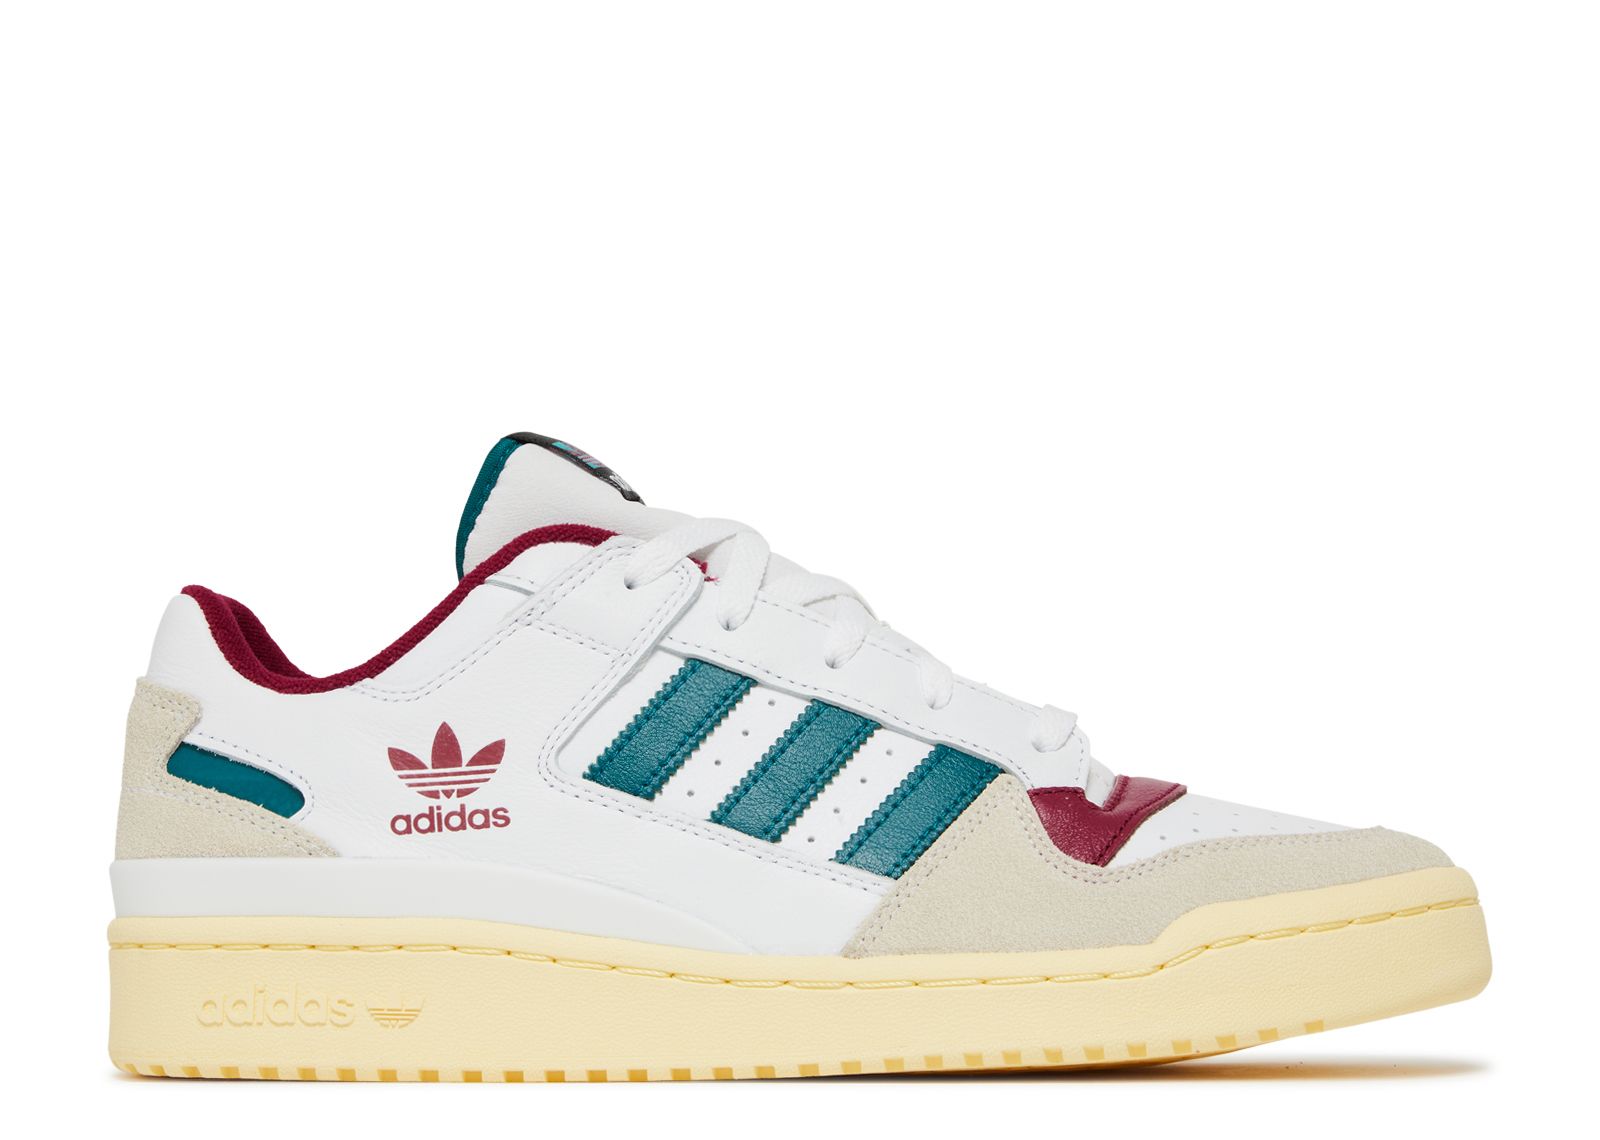 Forum Low CL 'White Legacy Teal' - Adidas - HQ6874 - cloud white/legacy